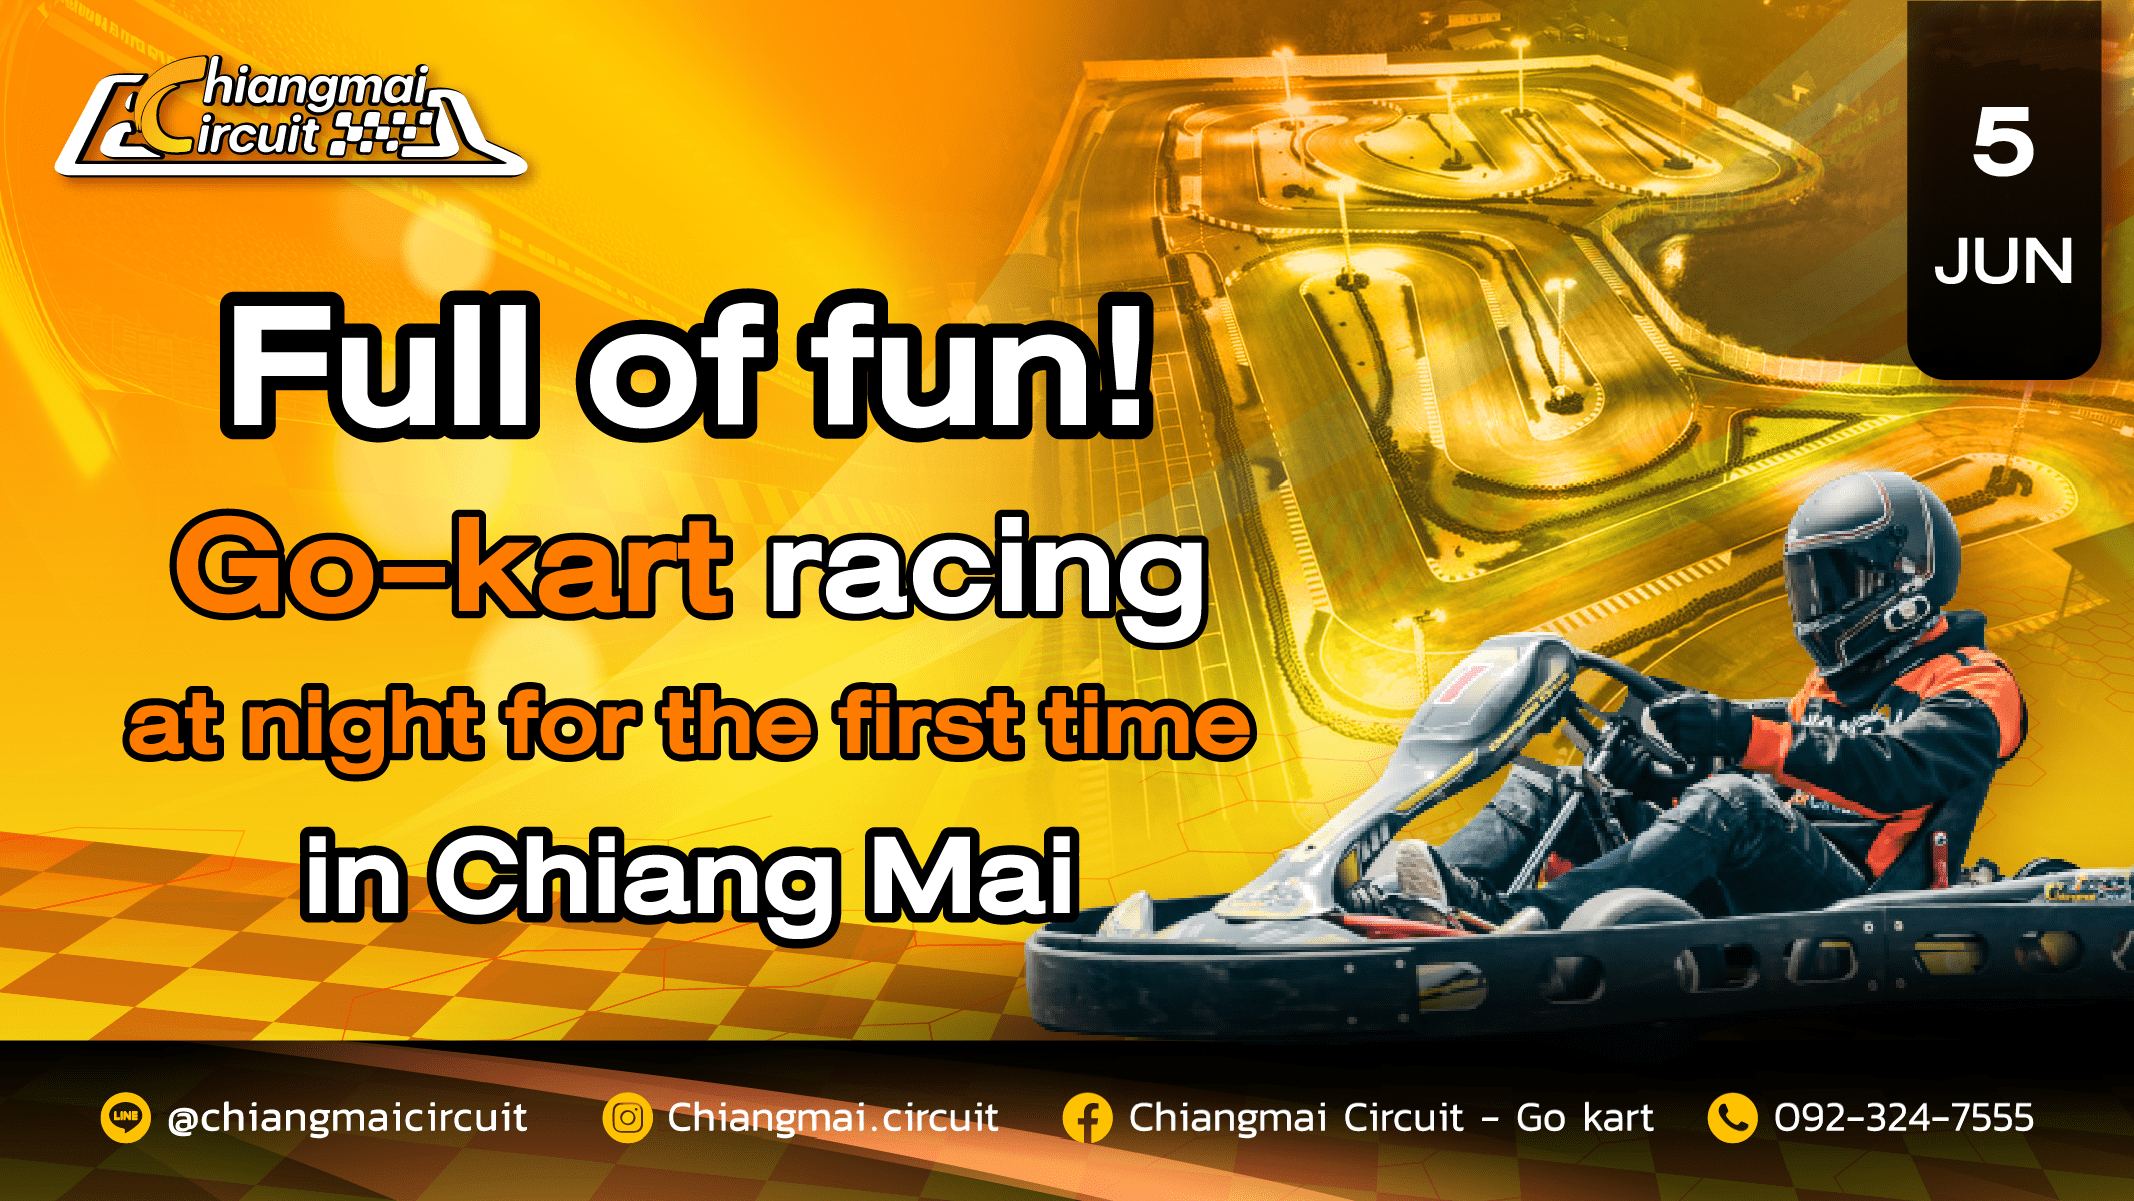 Full of fun! Go-kart racing at night for the first time in Chiang Mai.